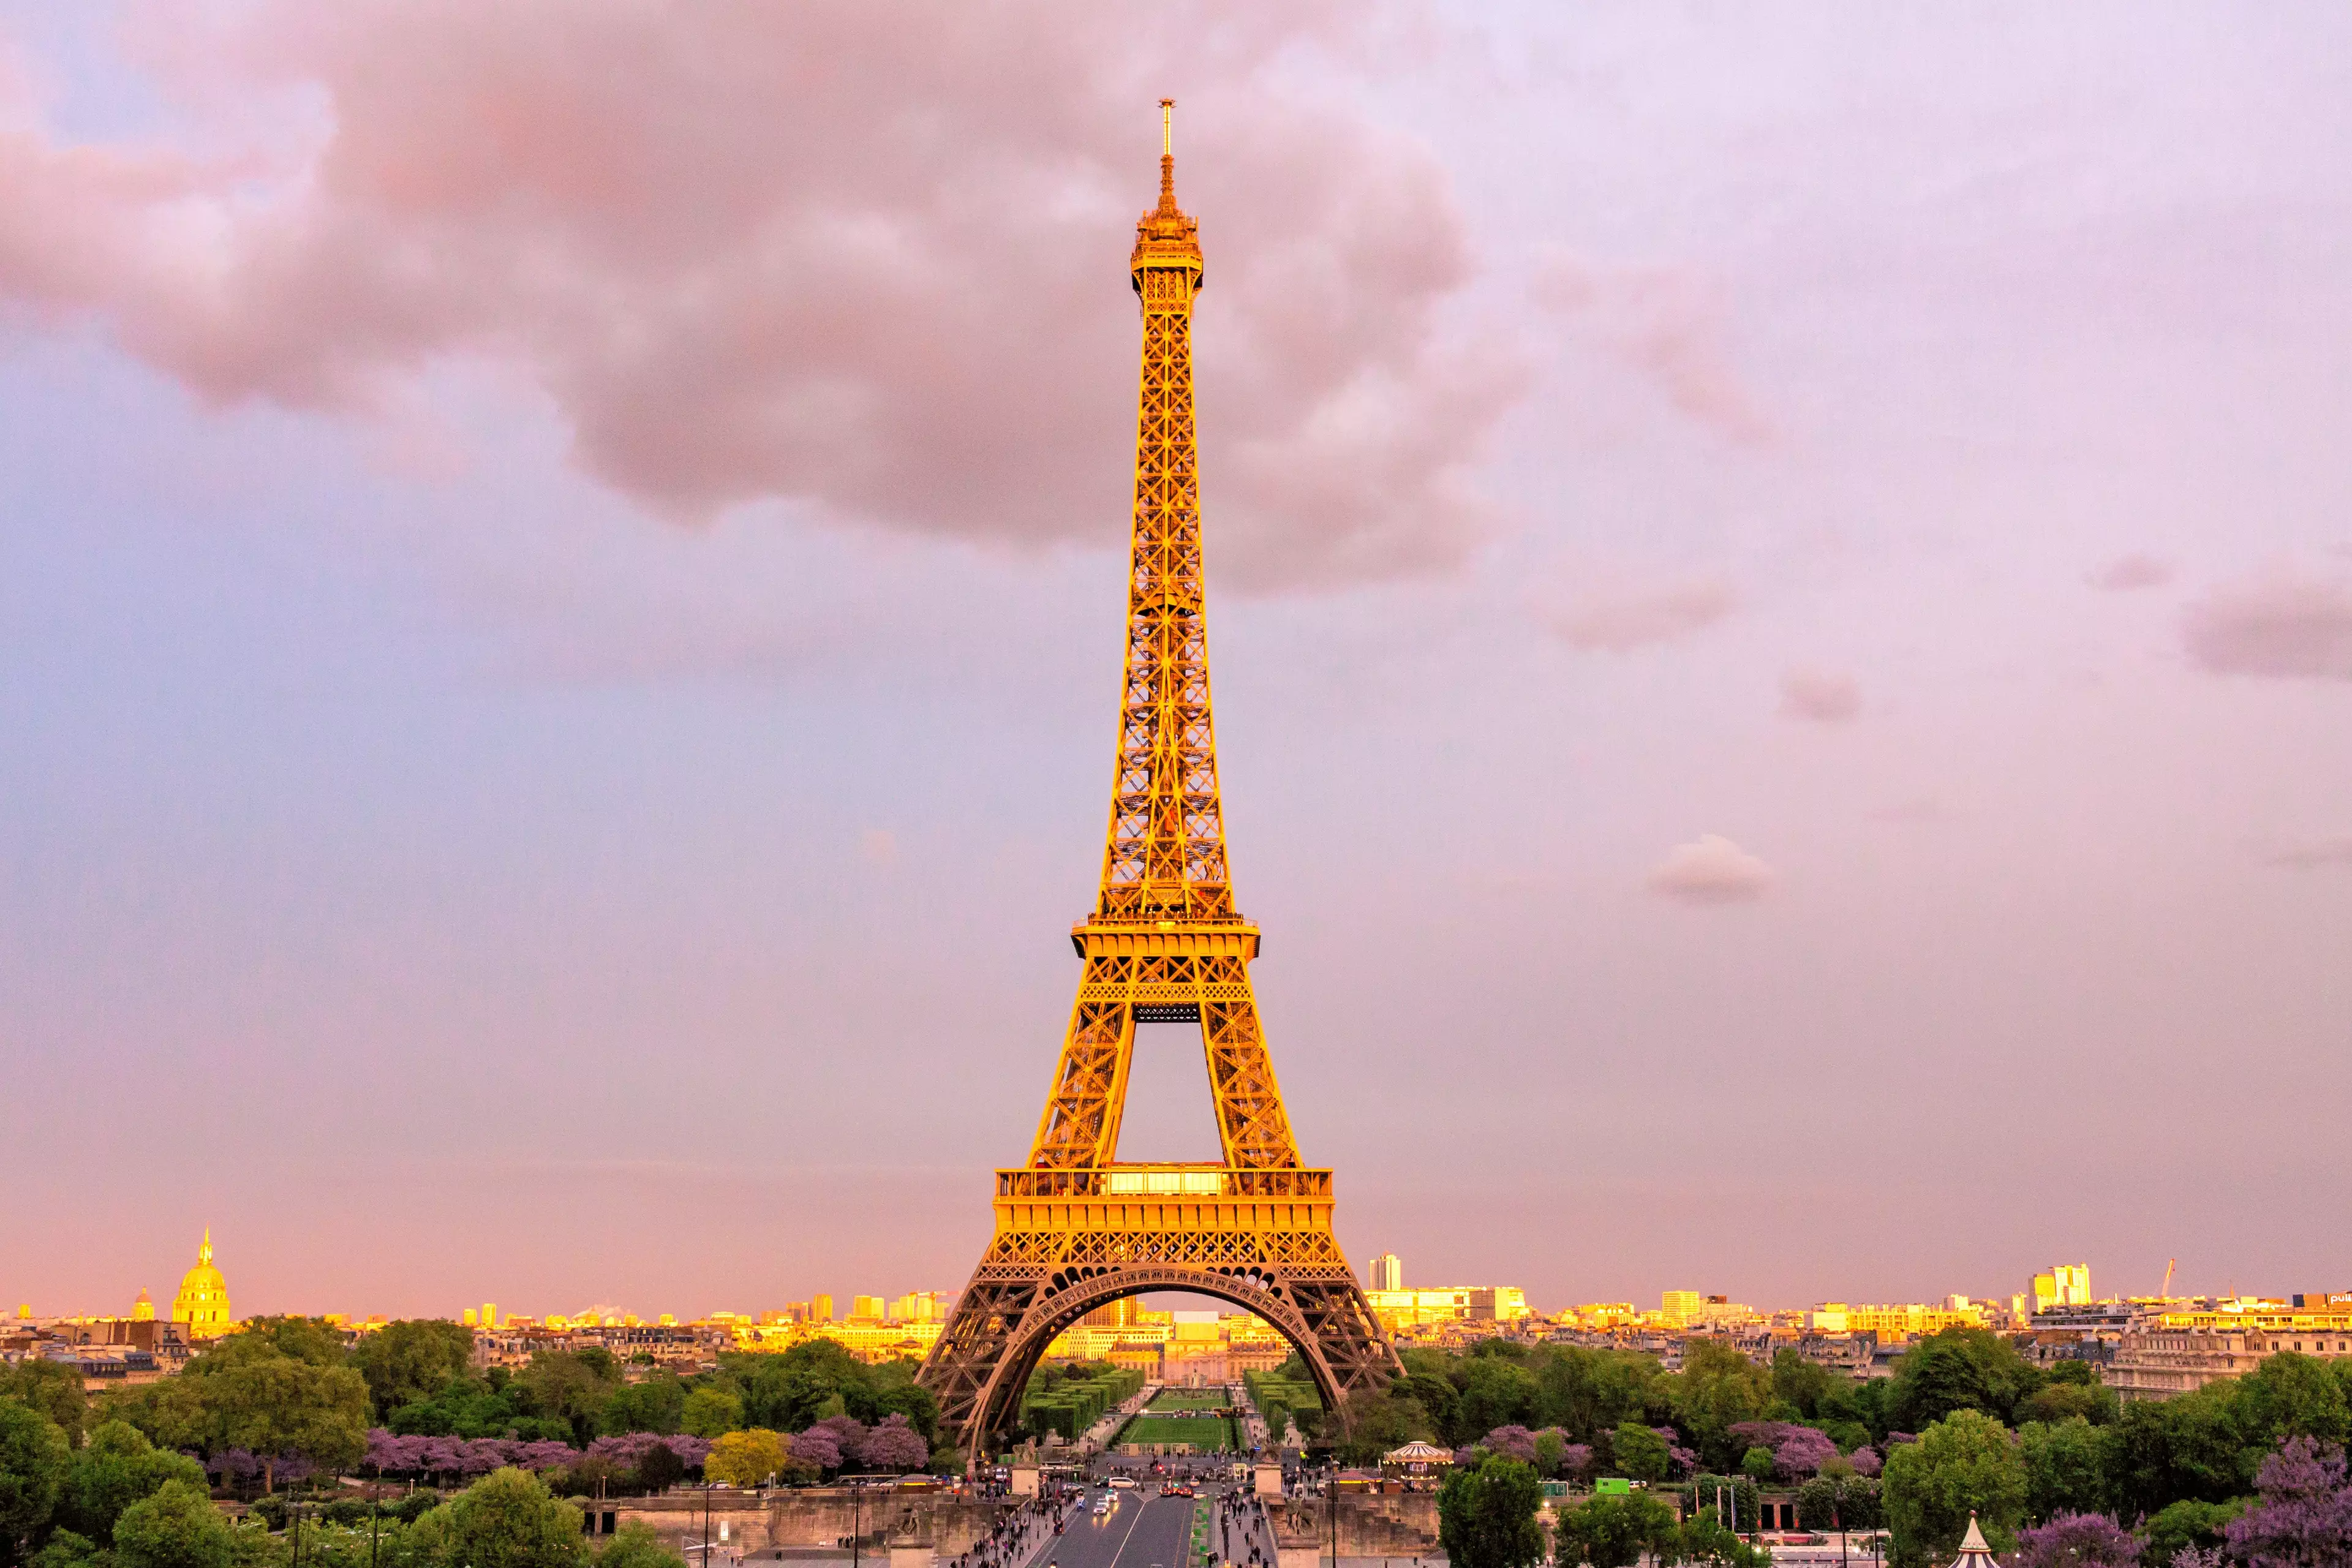 Successful candidates will get the chance to travel France by boat taking in sights such as the Eiffel Tower (